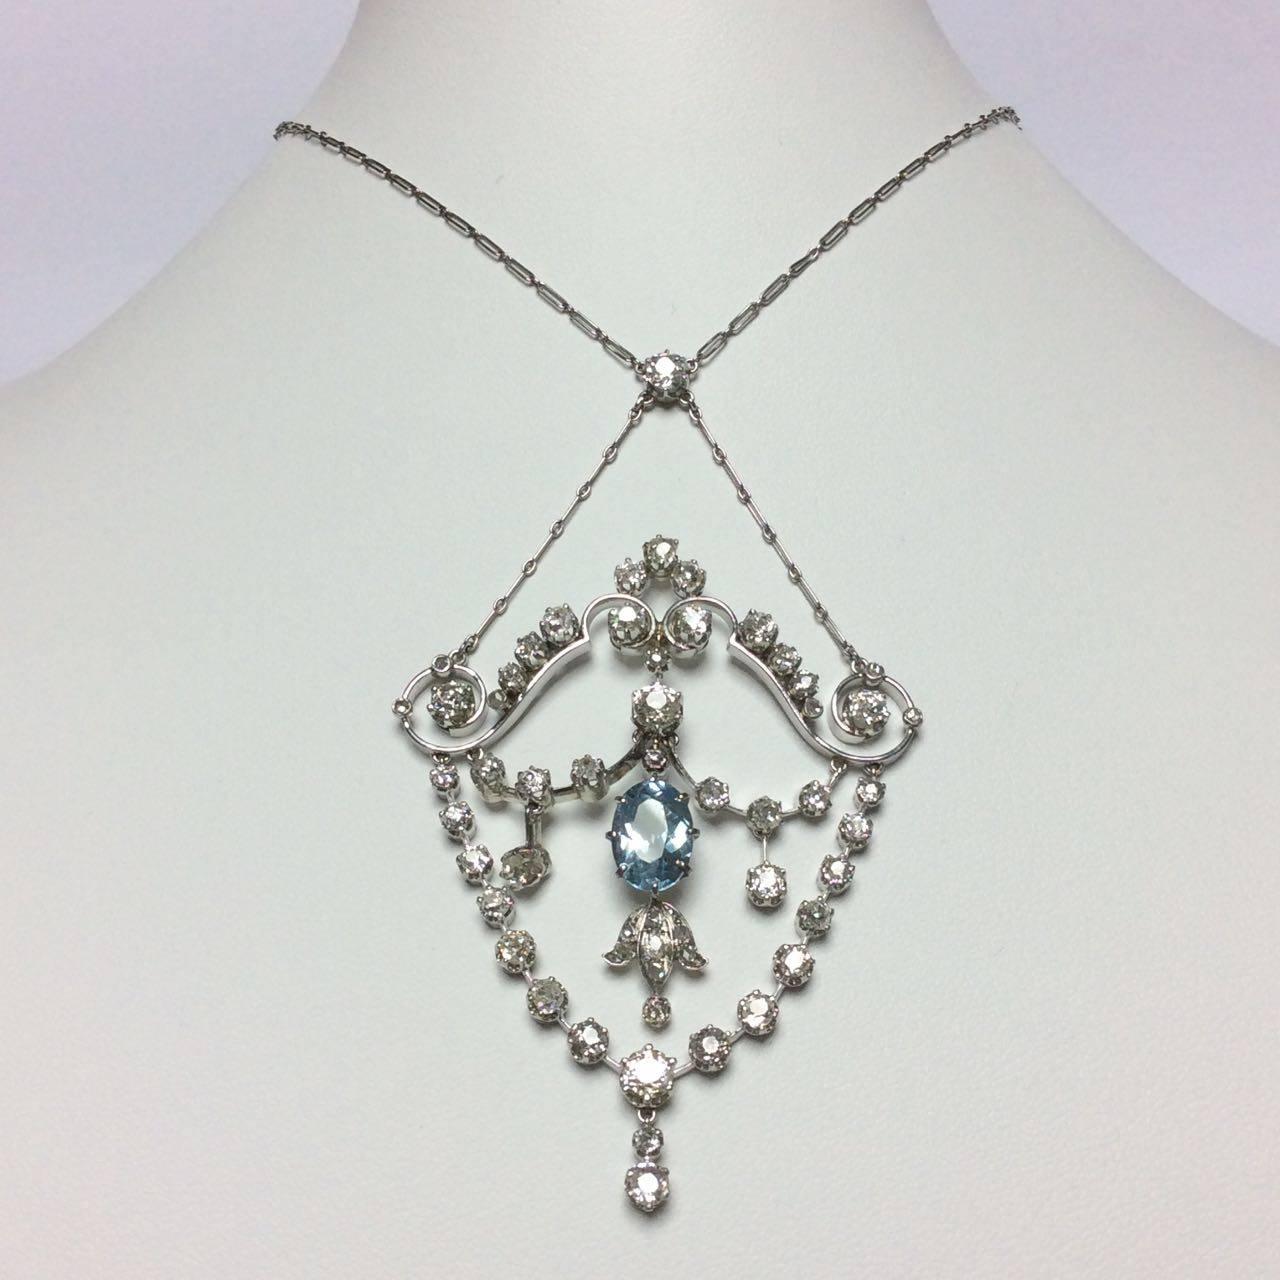 Platinum necklace set with aquamarine and diamonds brillant cut. Total diamond weight estimated at approximately 3.80 cts. French work Circa 1900.

